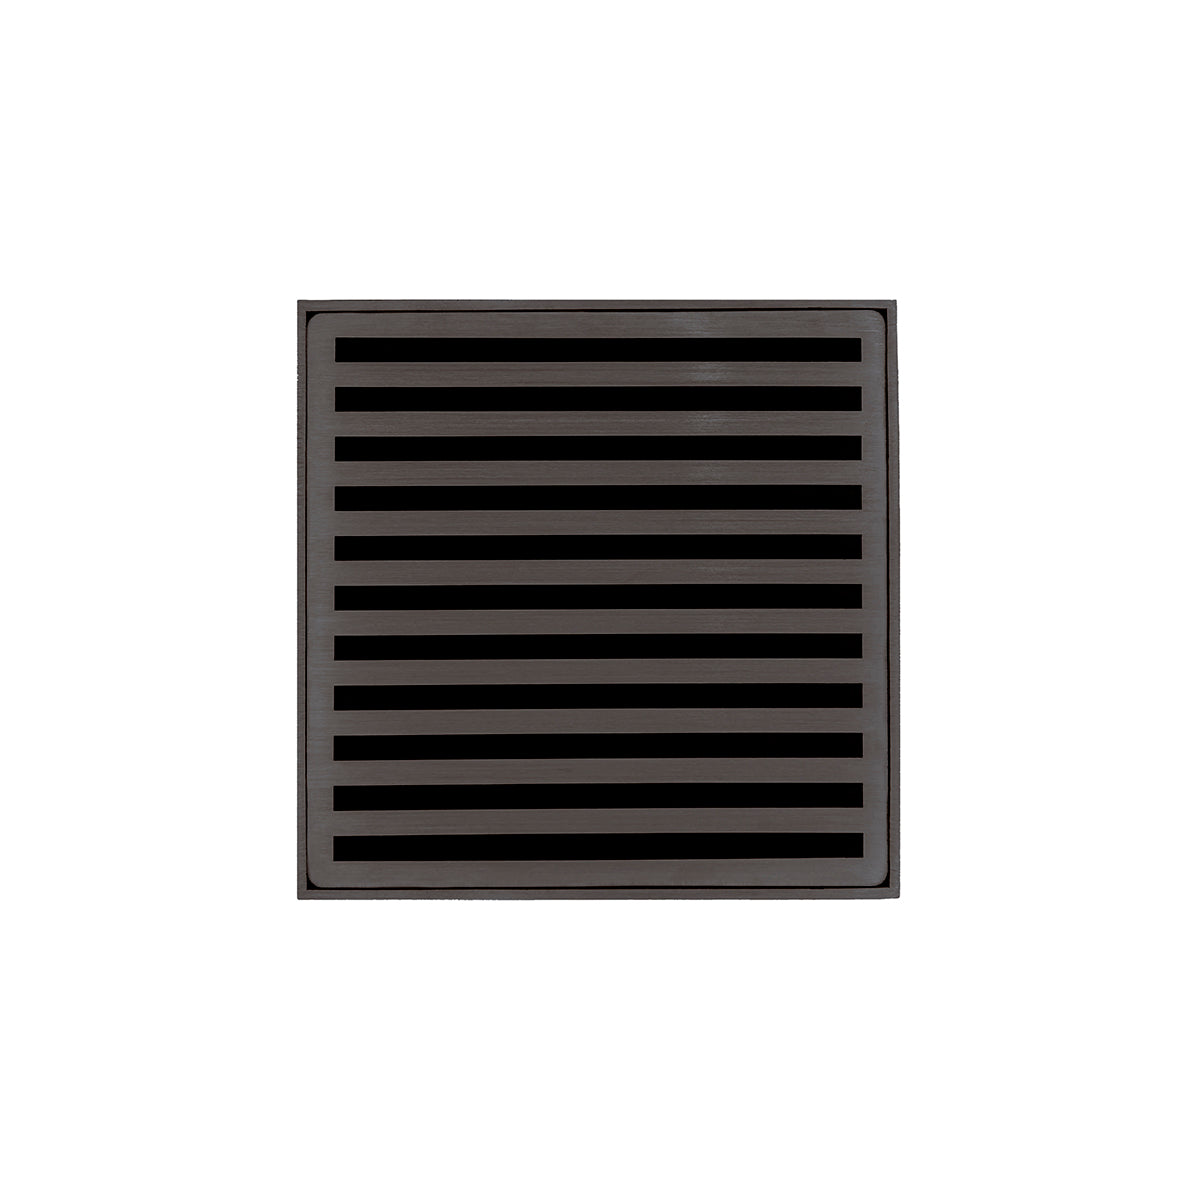 Infinity Drain 5" x 5" ND 5 Premium Center Drain Kit with Lines Pattern Decorative Plate with PVC Drain Body, 2" Outlet